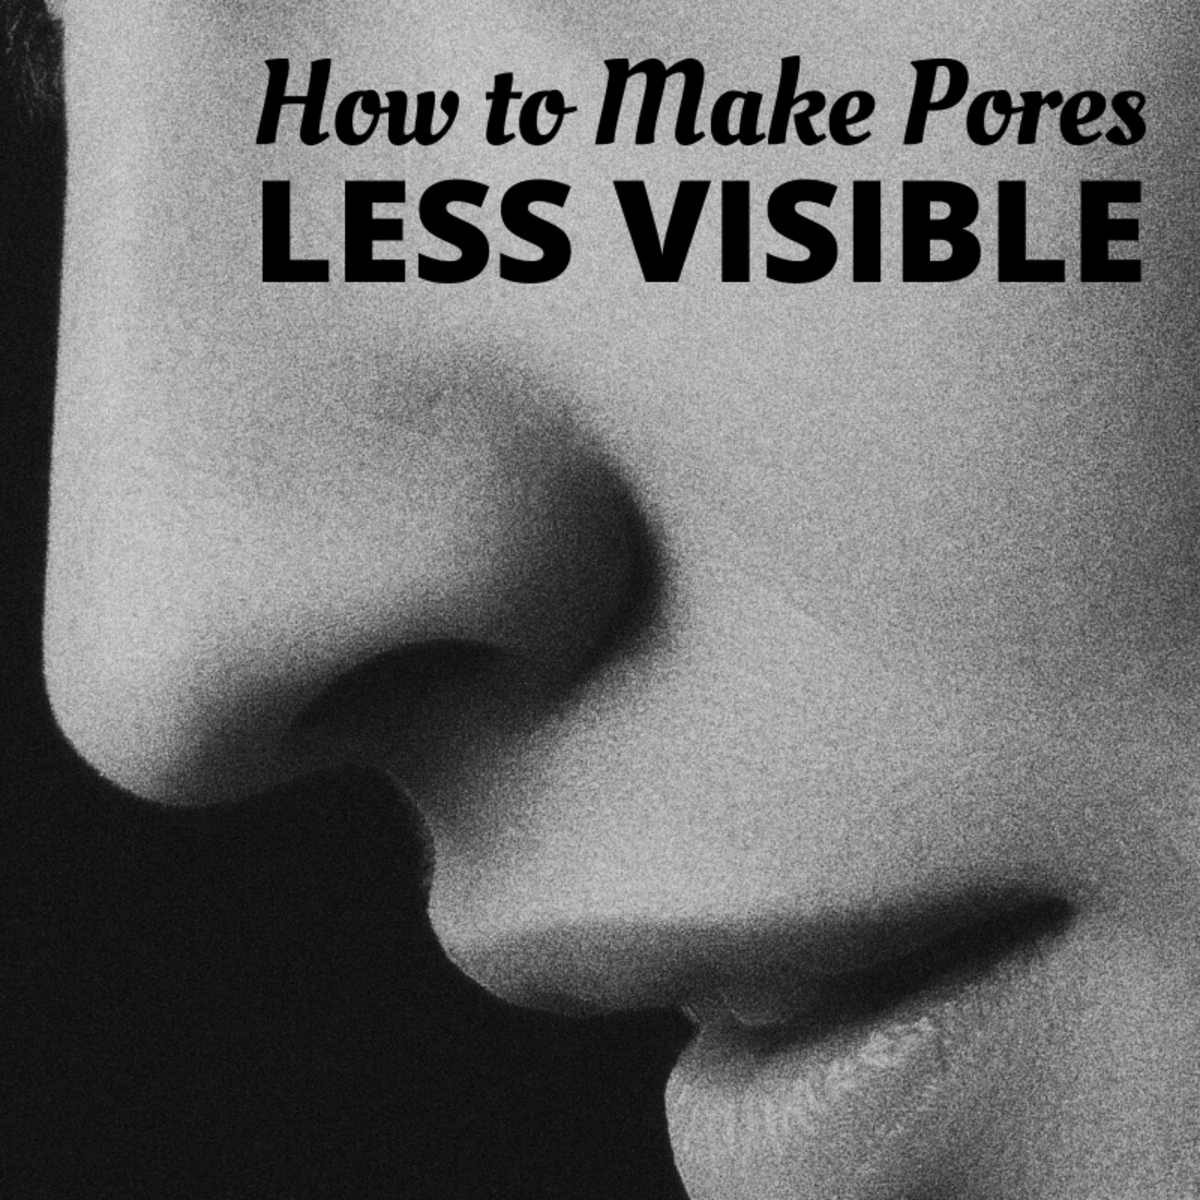 While you can't change the pores you were born with, you can takes steps to keep them less visible. 